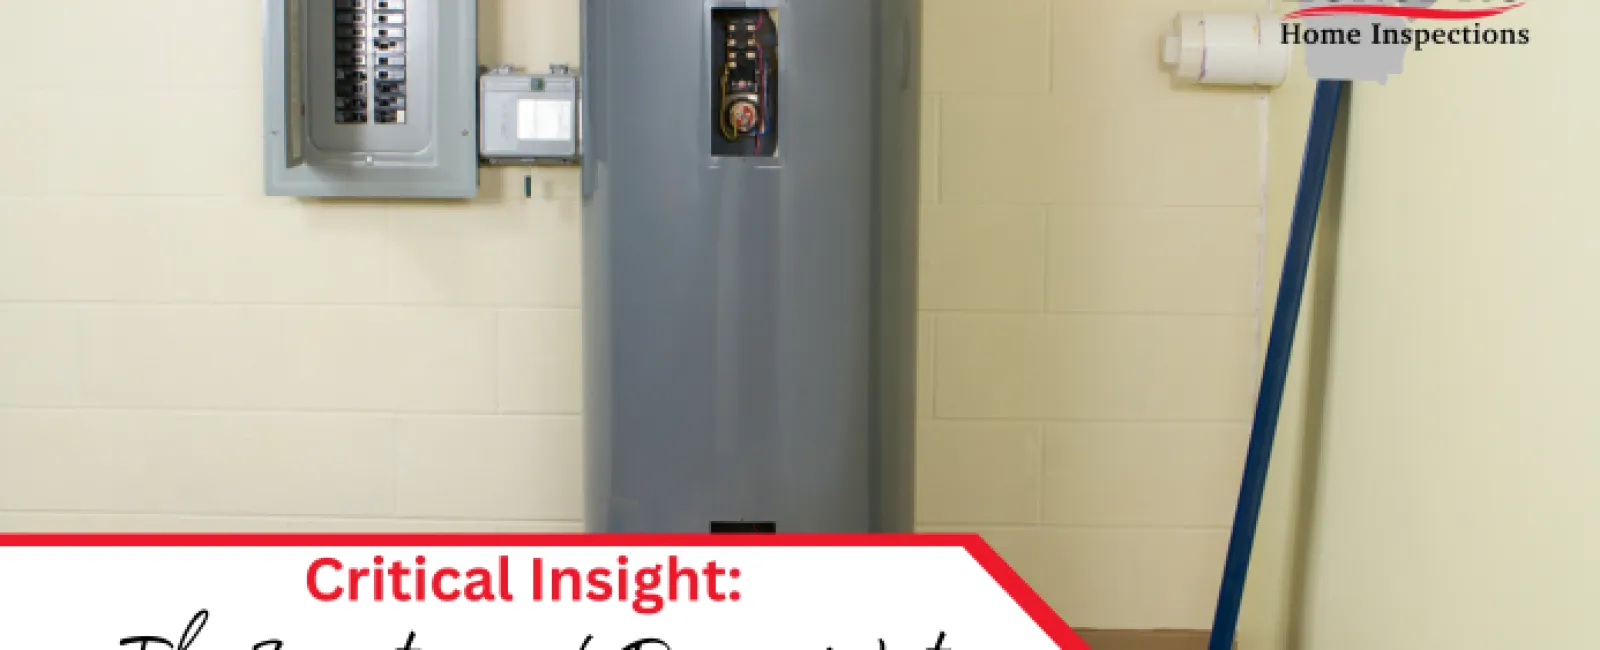 Critical Insight: The Importance of Proper Water Heater TPR Valve Setup